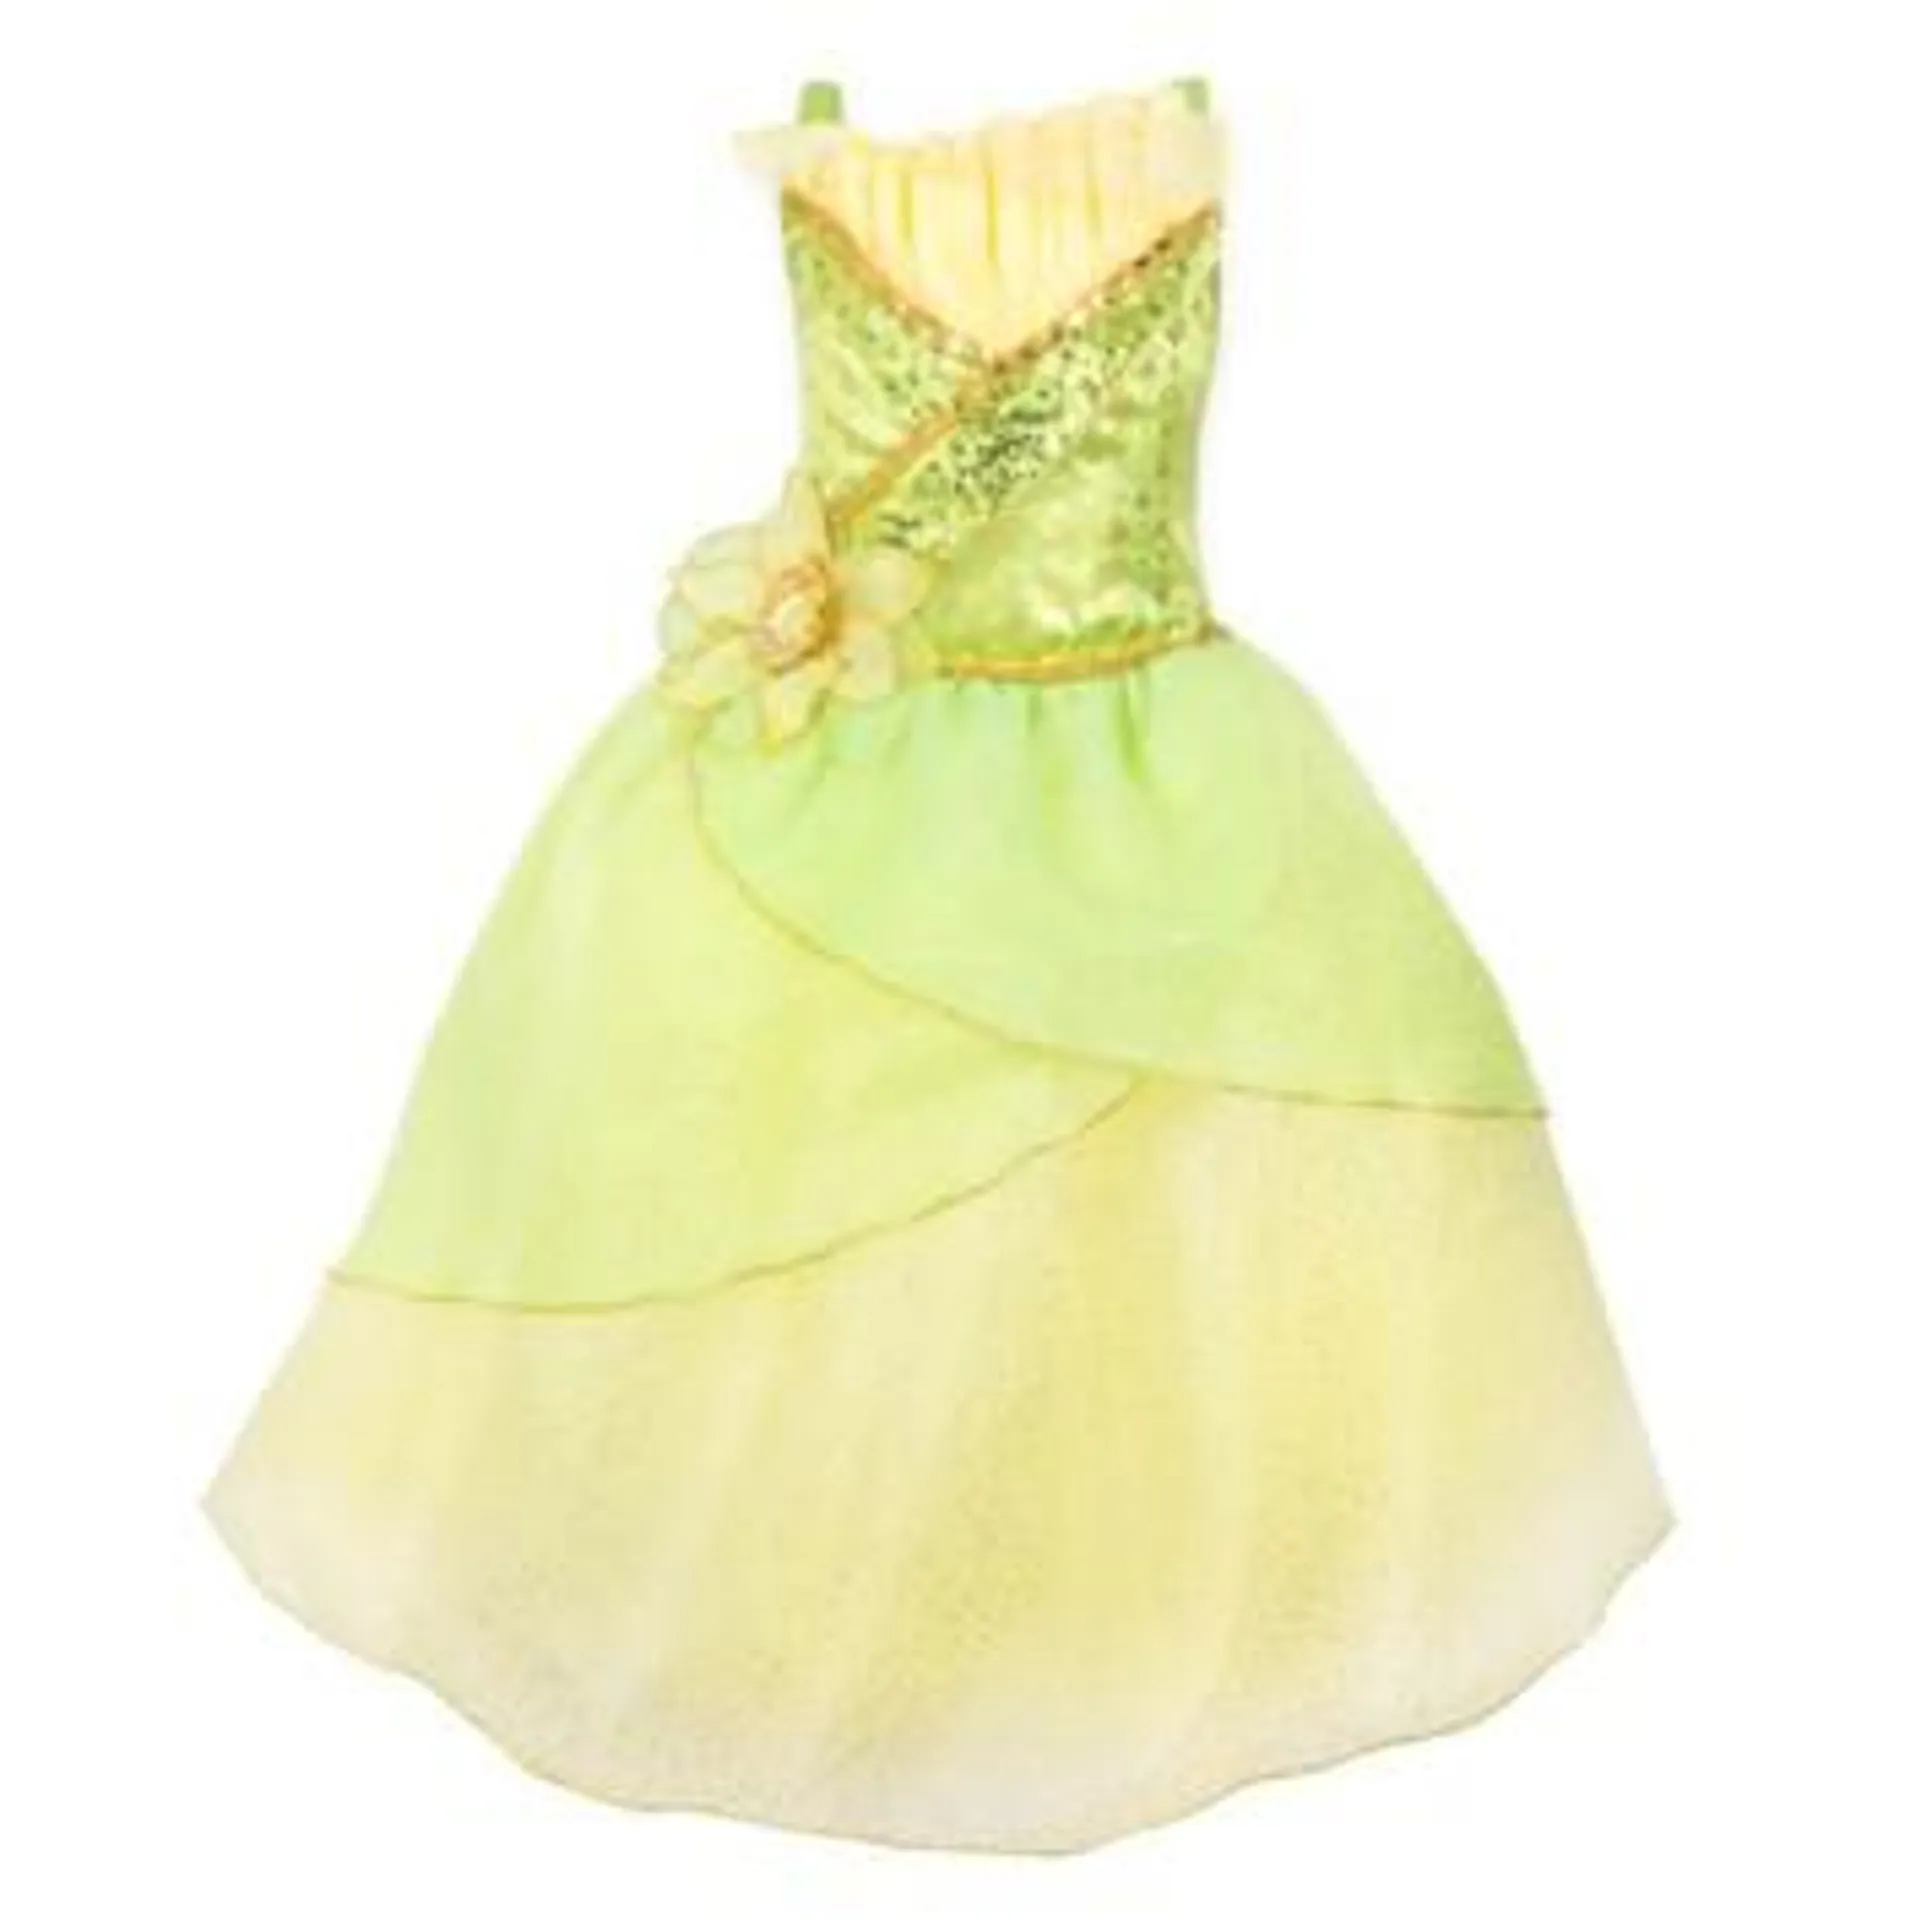 Tiana Costume Collection For Kids, The Princess and the Frog